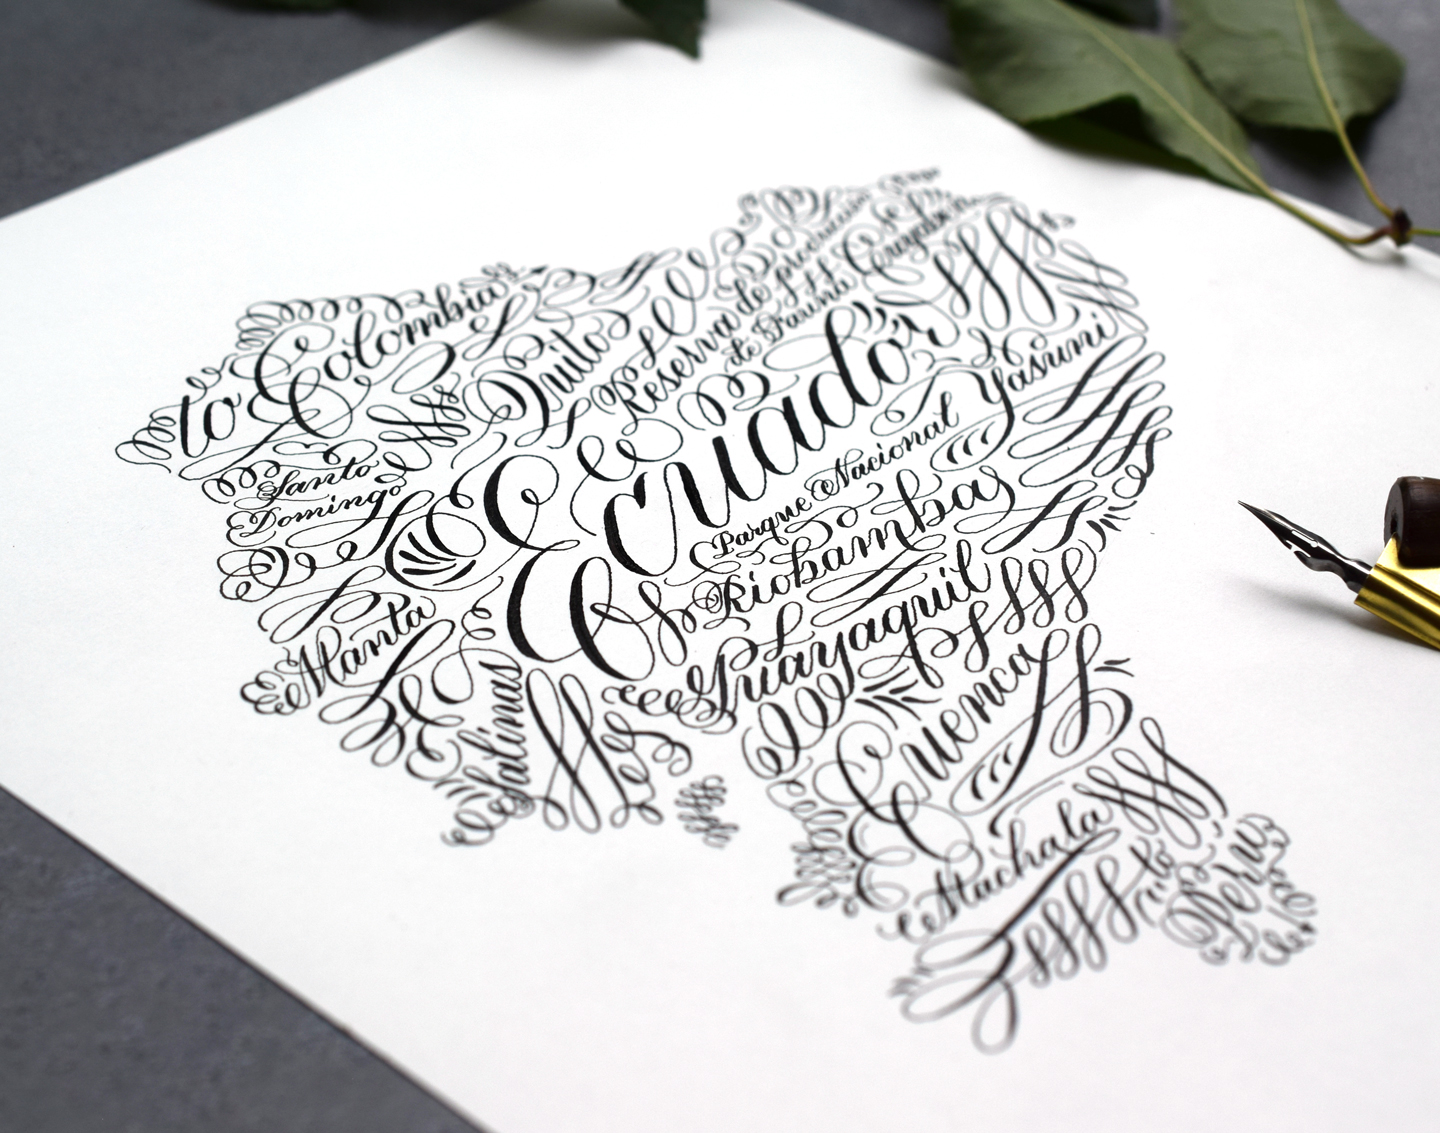 Flourished Calligraphy Country or State Art Tutorial